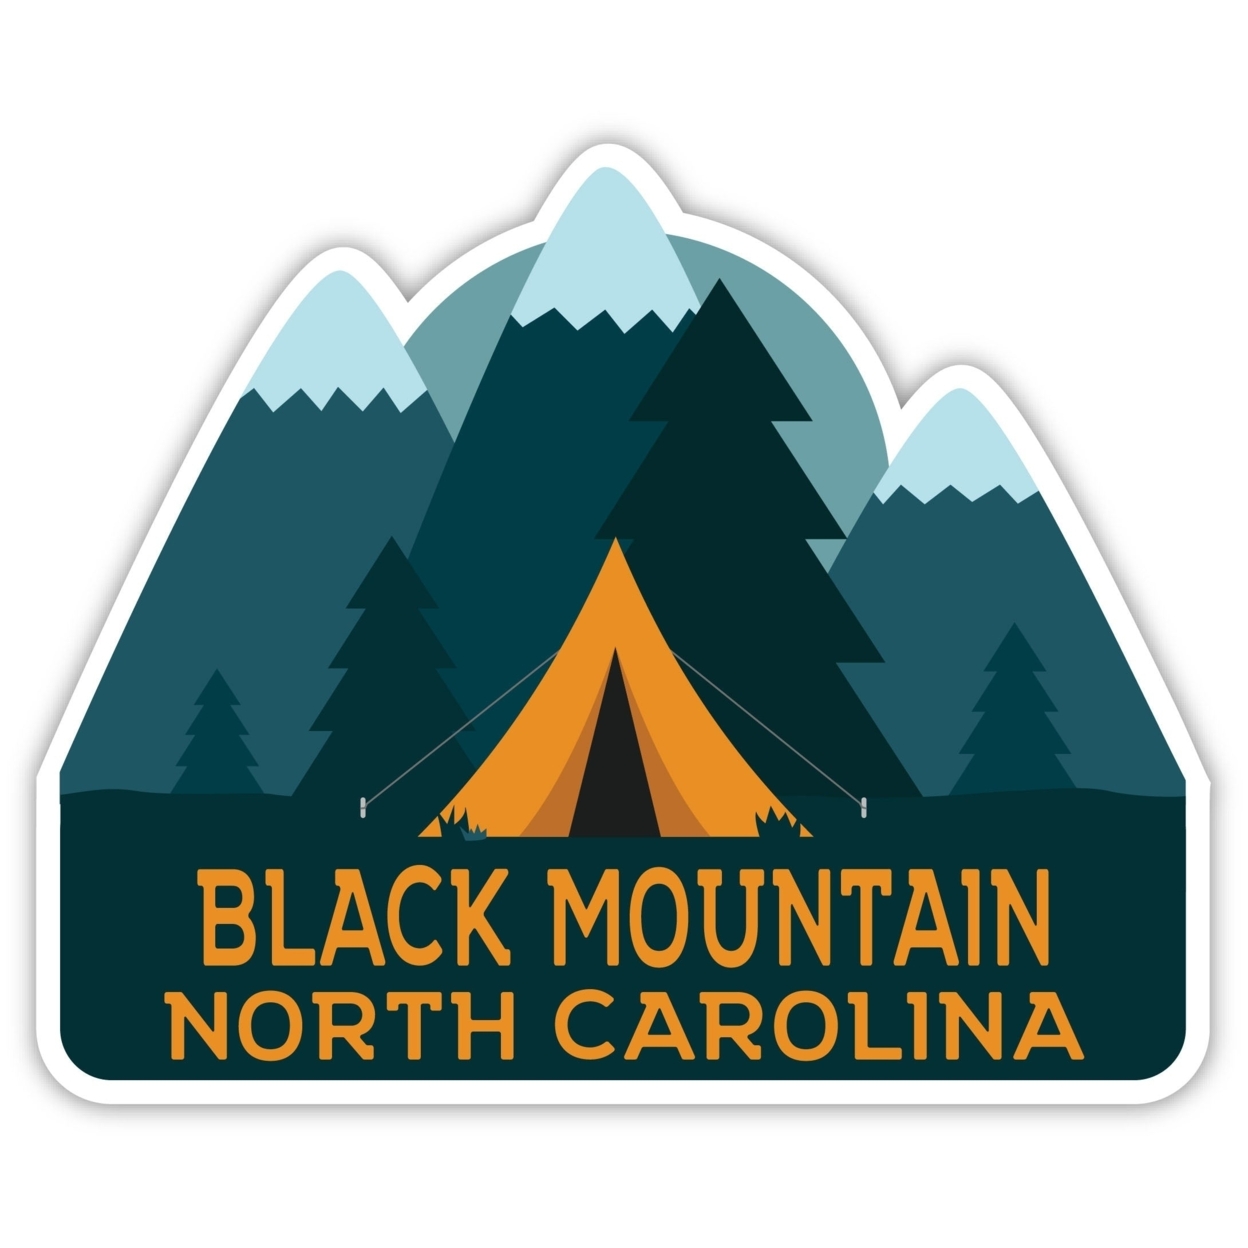 Black Mountain North Carolina Souvenir Decorative Stickers (Choose Theme And Size) - 4-Pack, 8-Inch, Tent